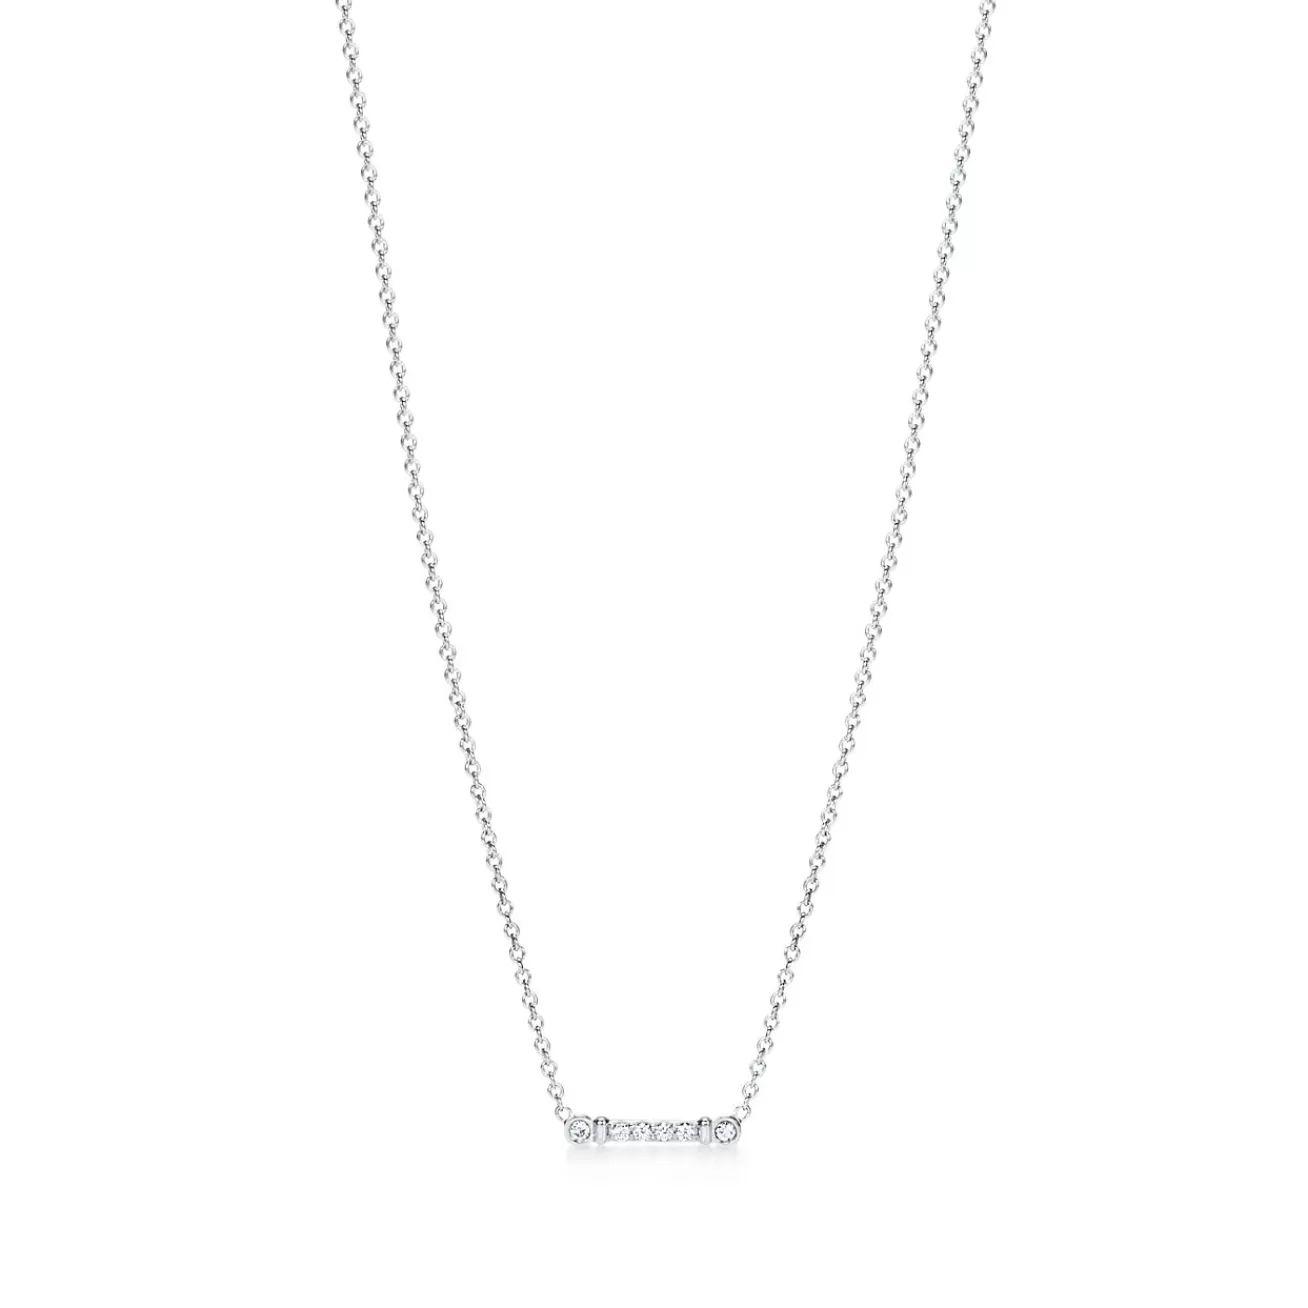 Tiffany & Co. Tiffany Fleur de Lis key bar pendant in platinum with diamonds. | ^ Necklaces & Pendants | Gifts for Her